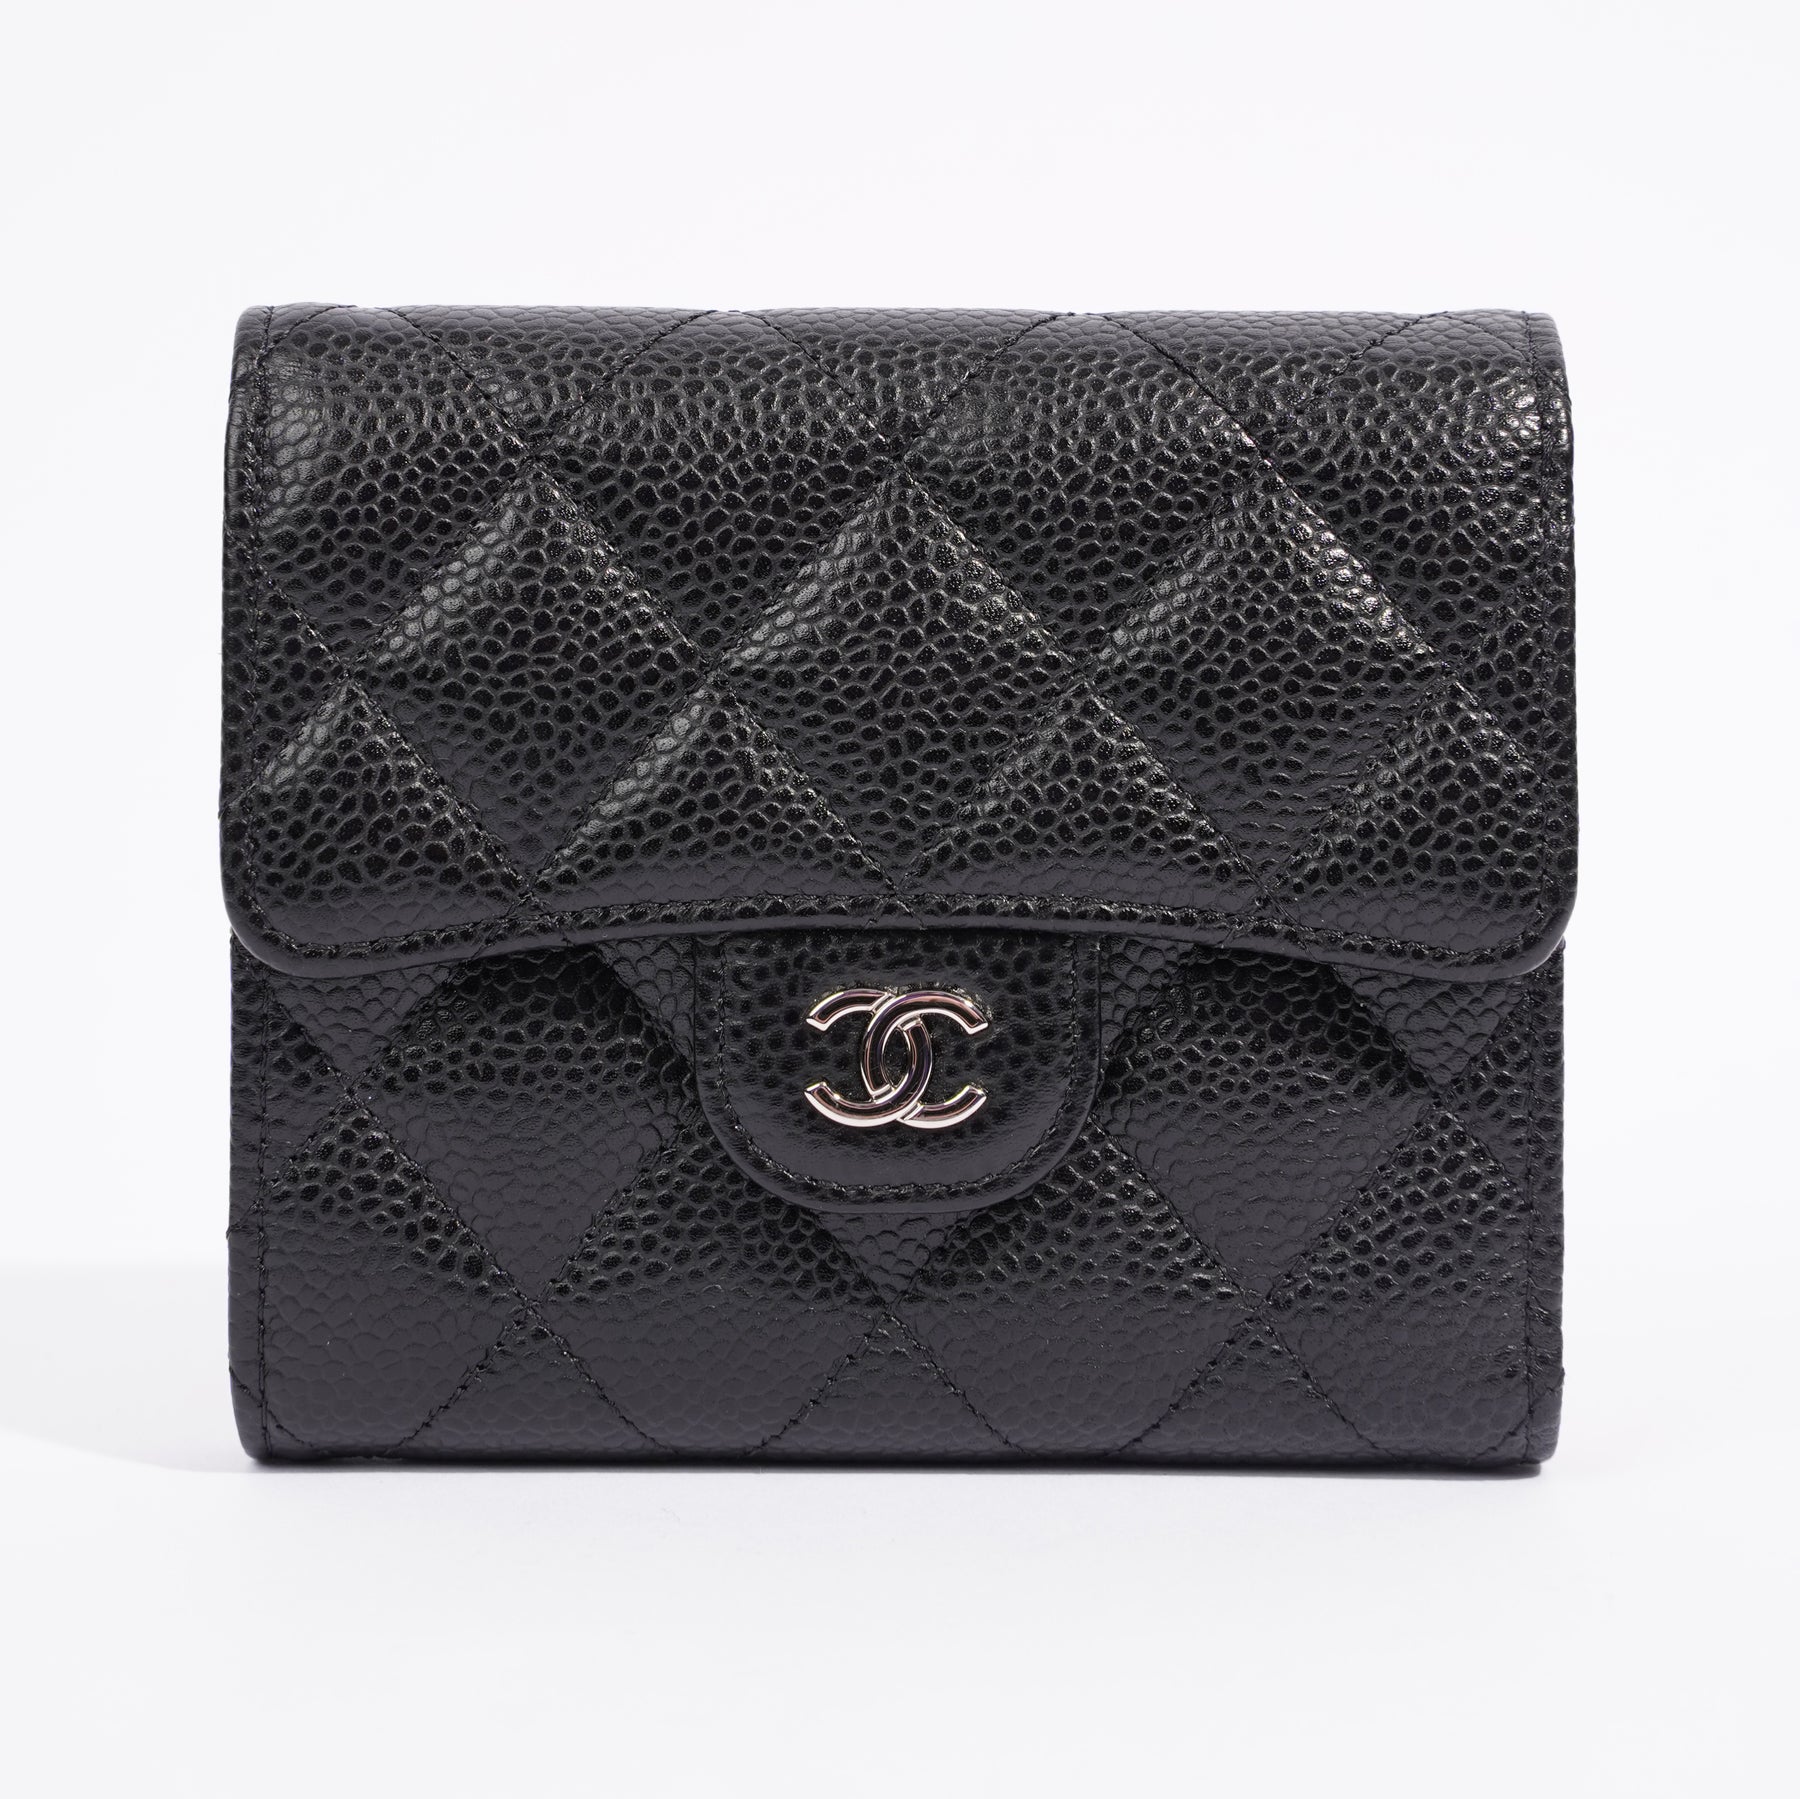 Chanel Classic Small Flap Wallet Ap0231 Y01588 C3906, Black, One Size